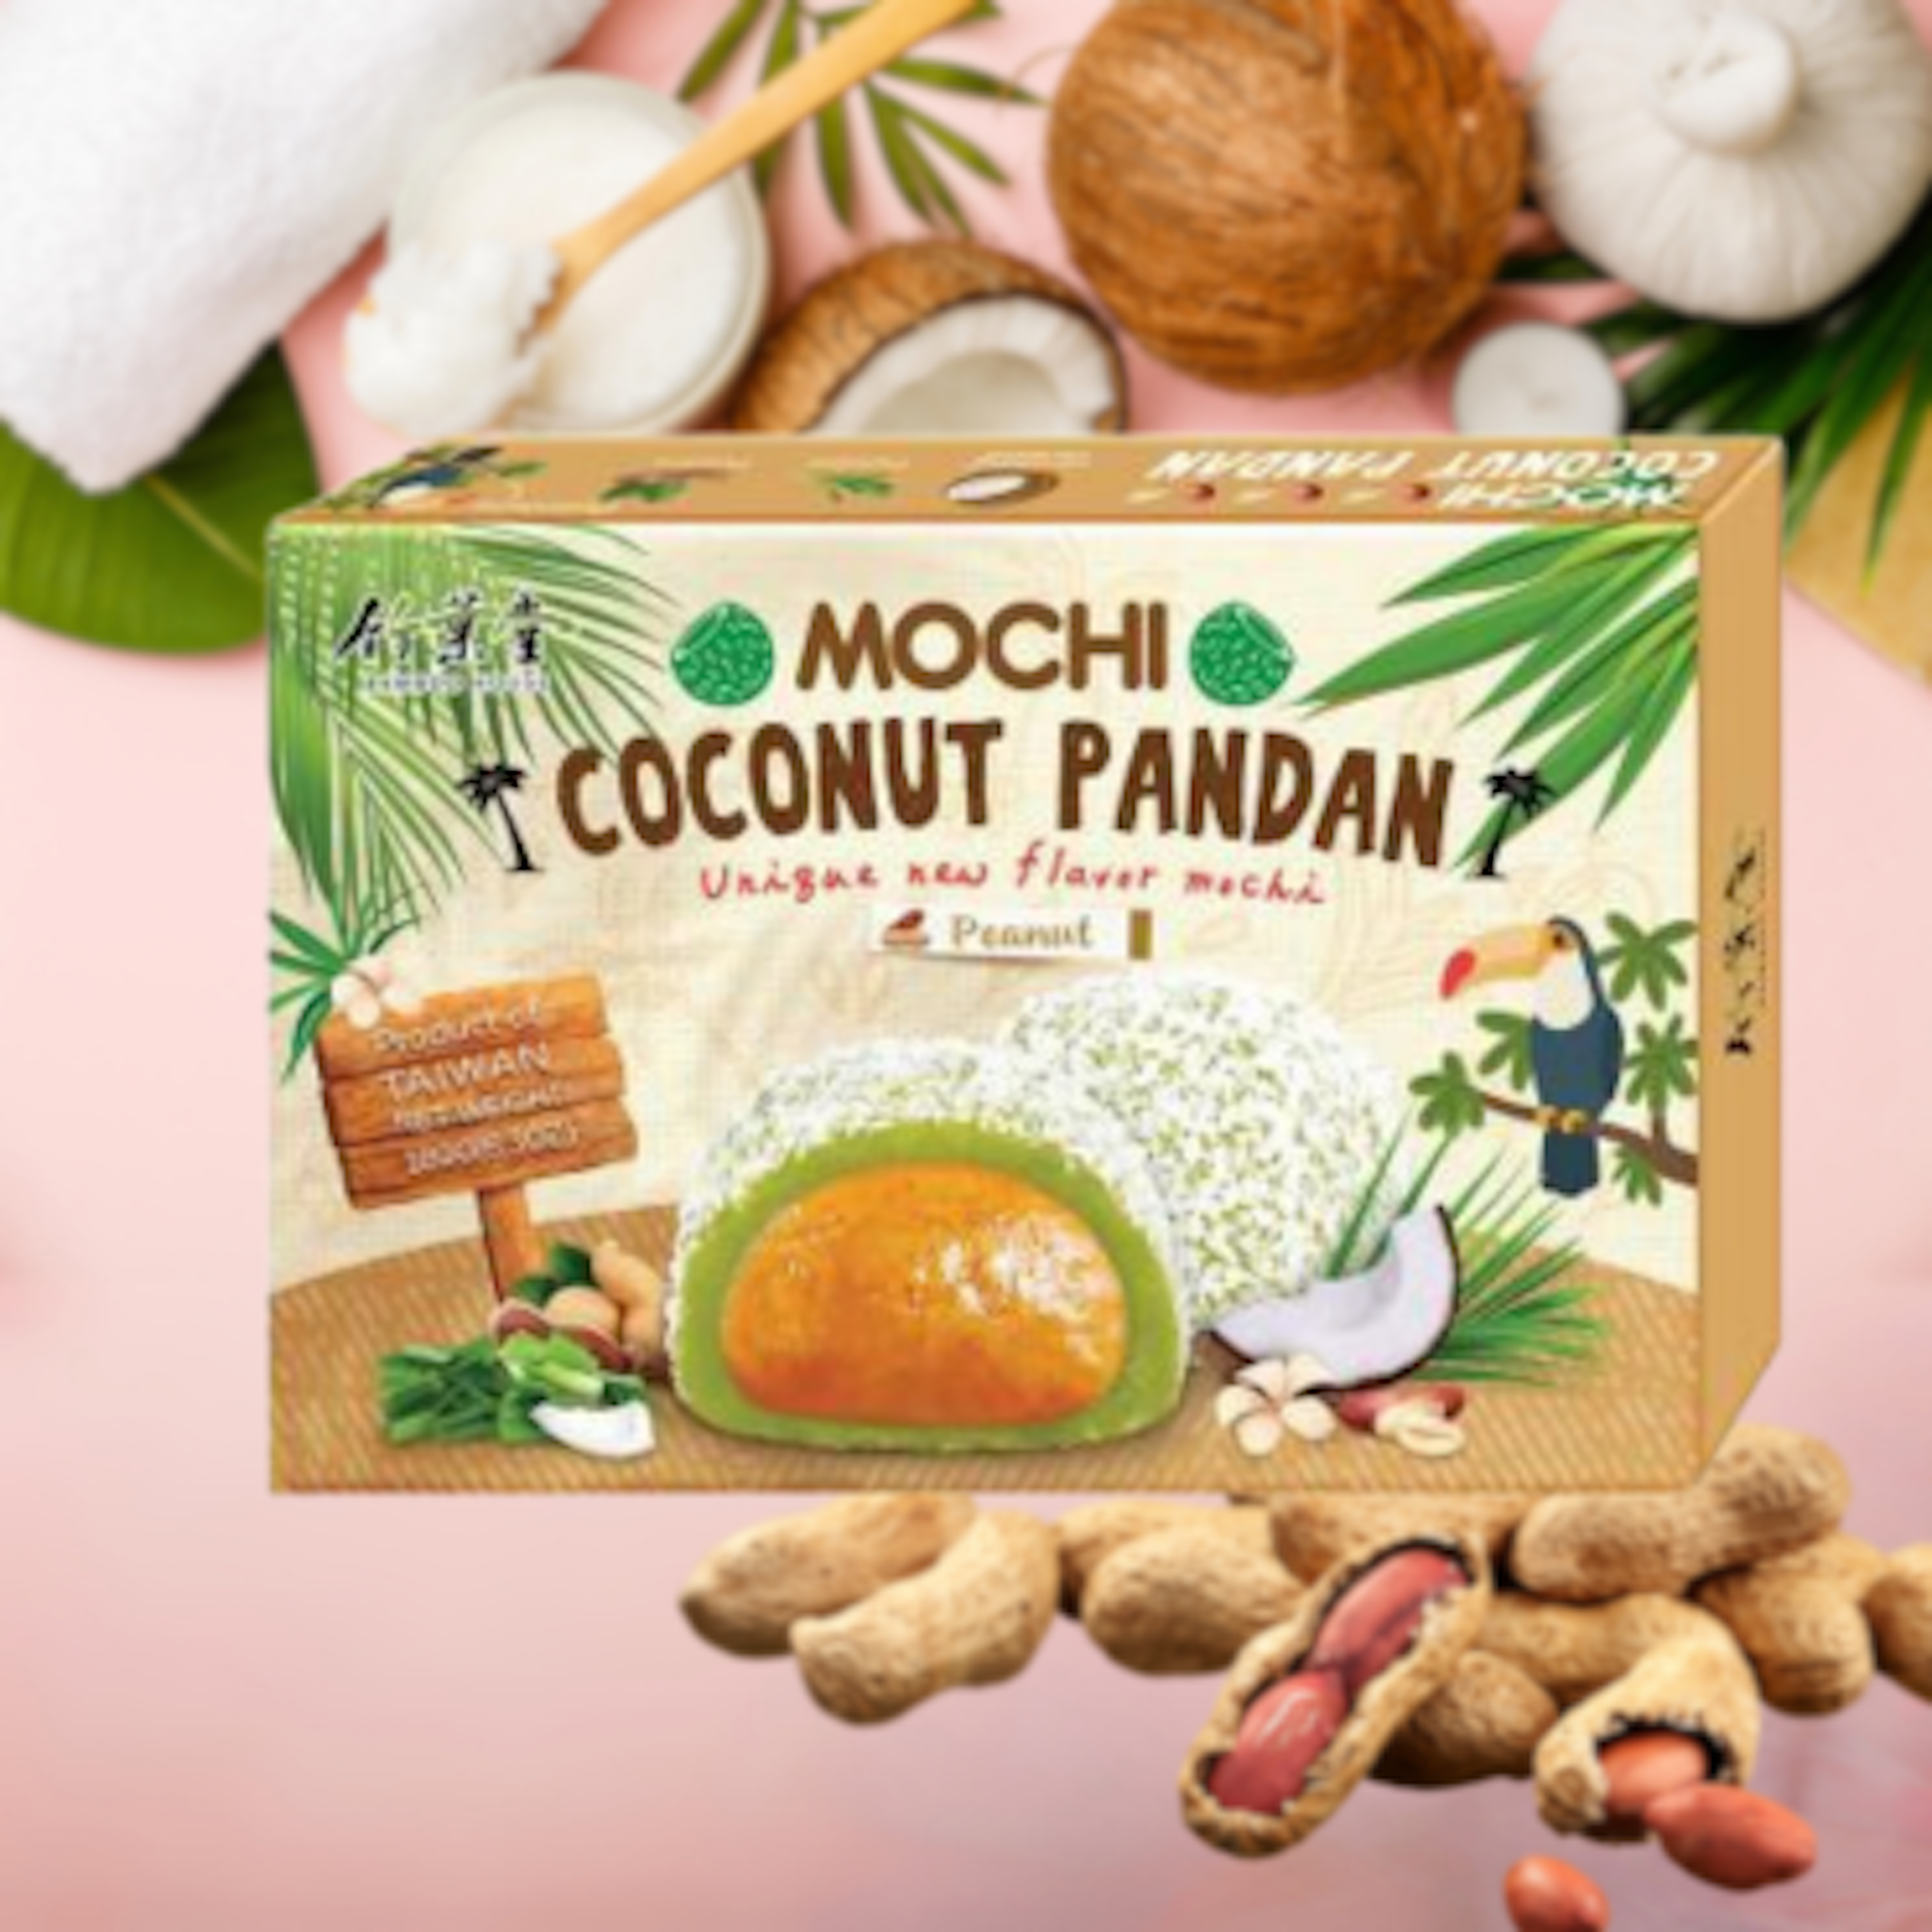 Bamboo House Mochi Coconut Pandan Peanut 180g - Delicious and Tender Japanese Sweet